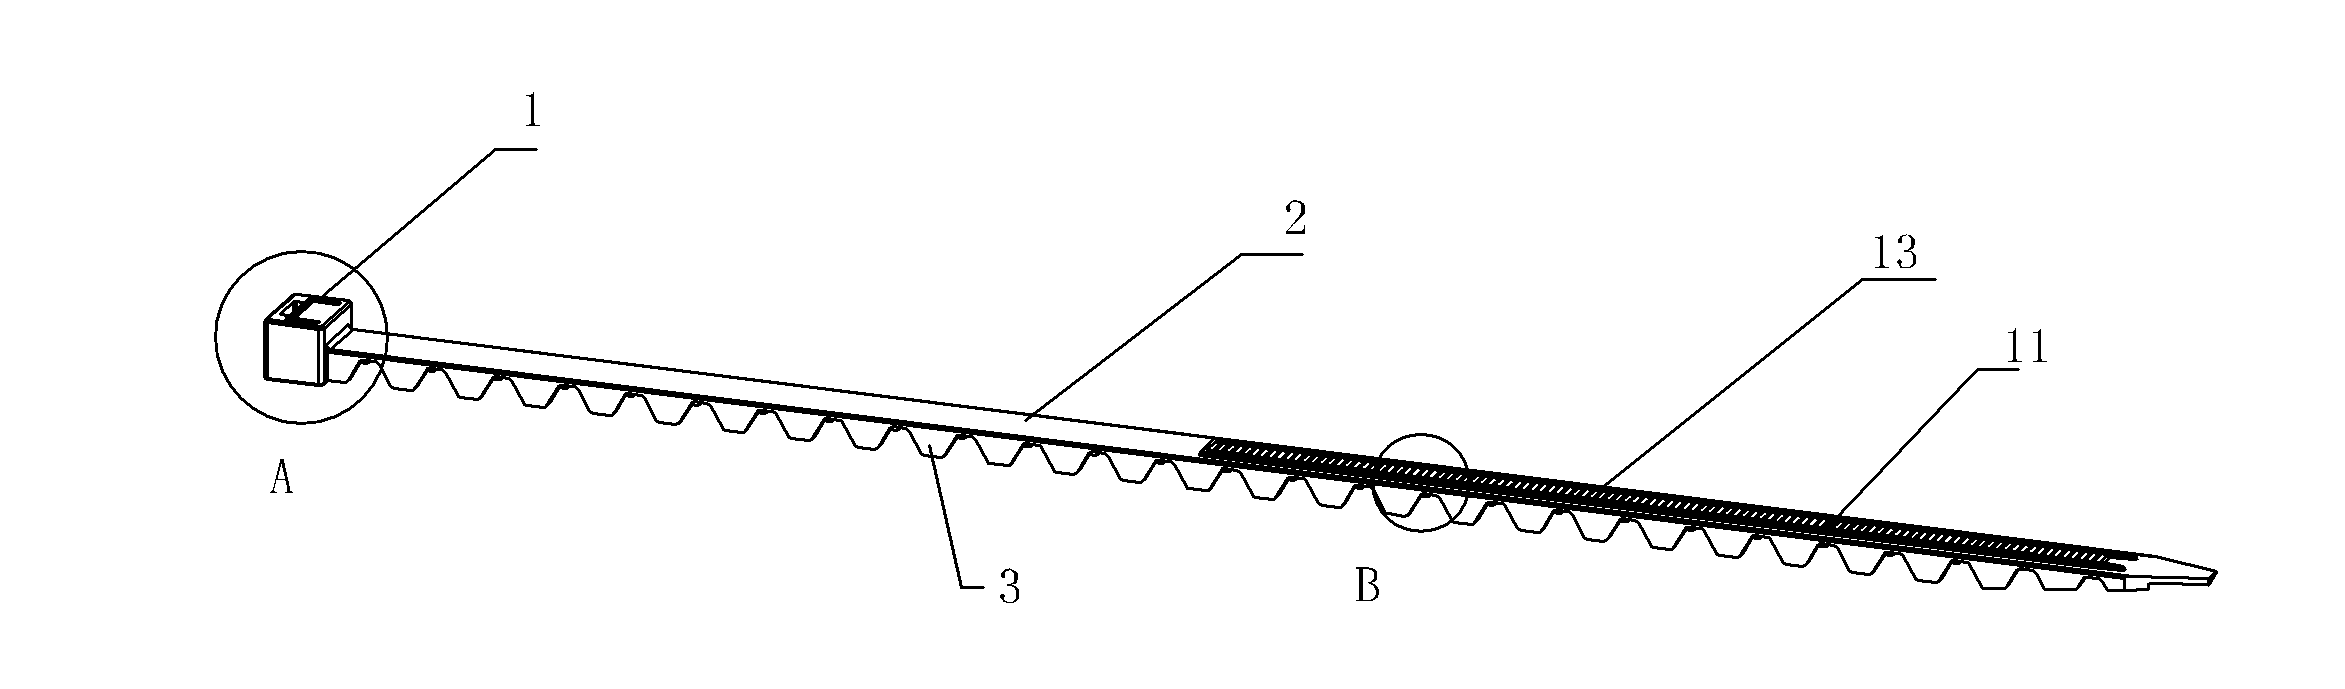 U-shaped staple bolt protecting belt used on hydraulic pipeline connecting component